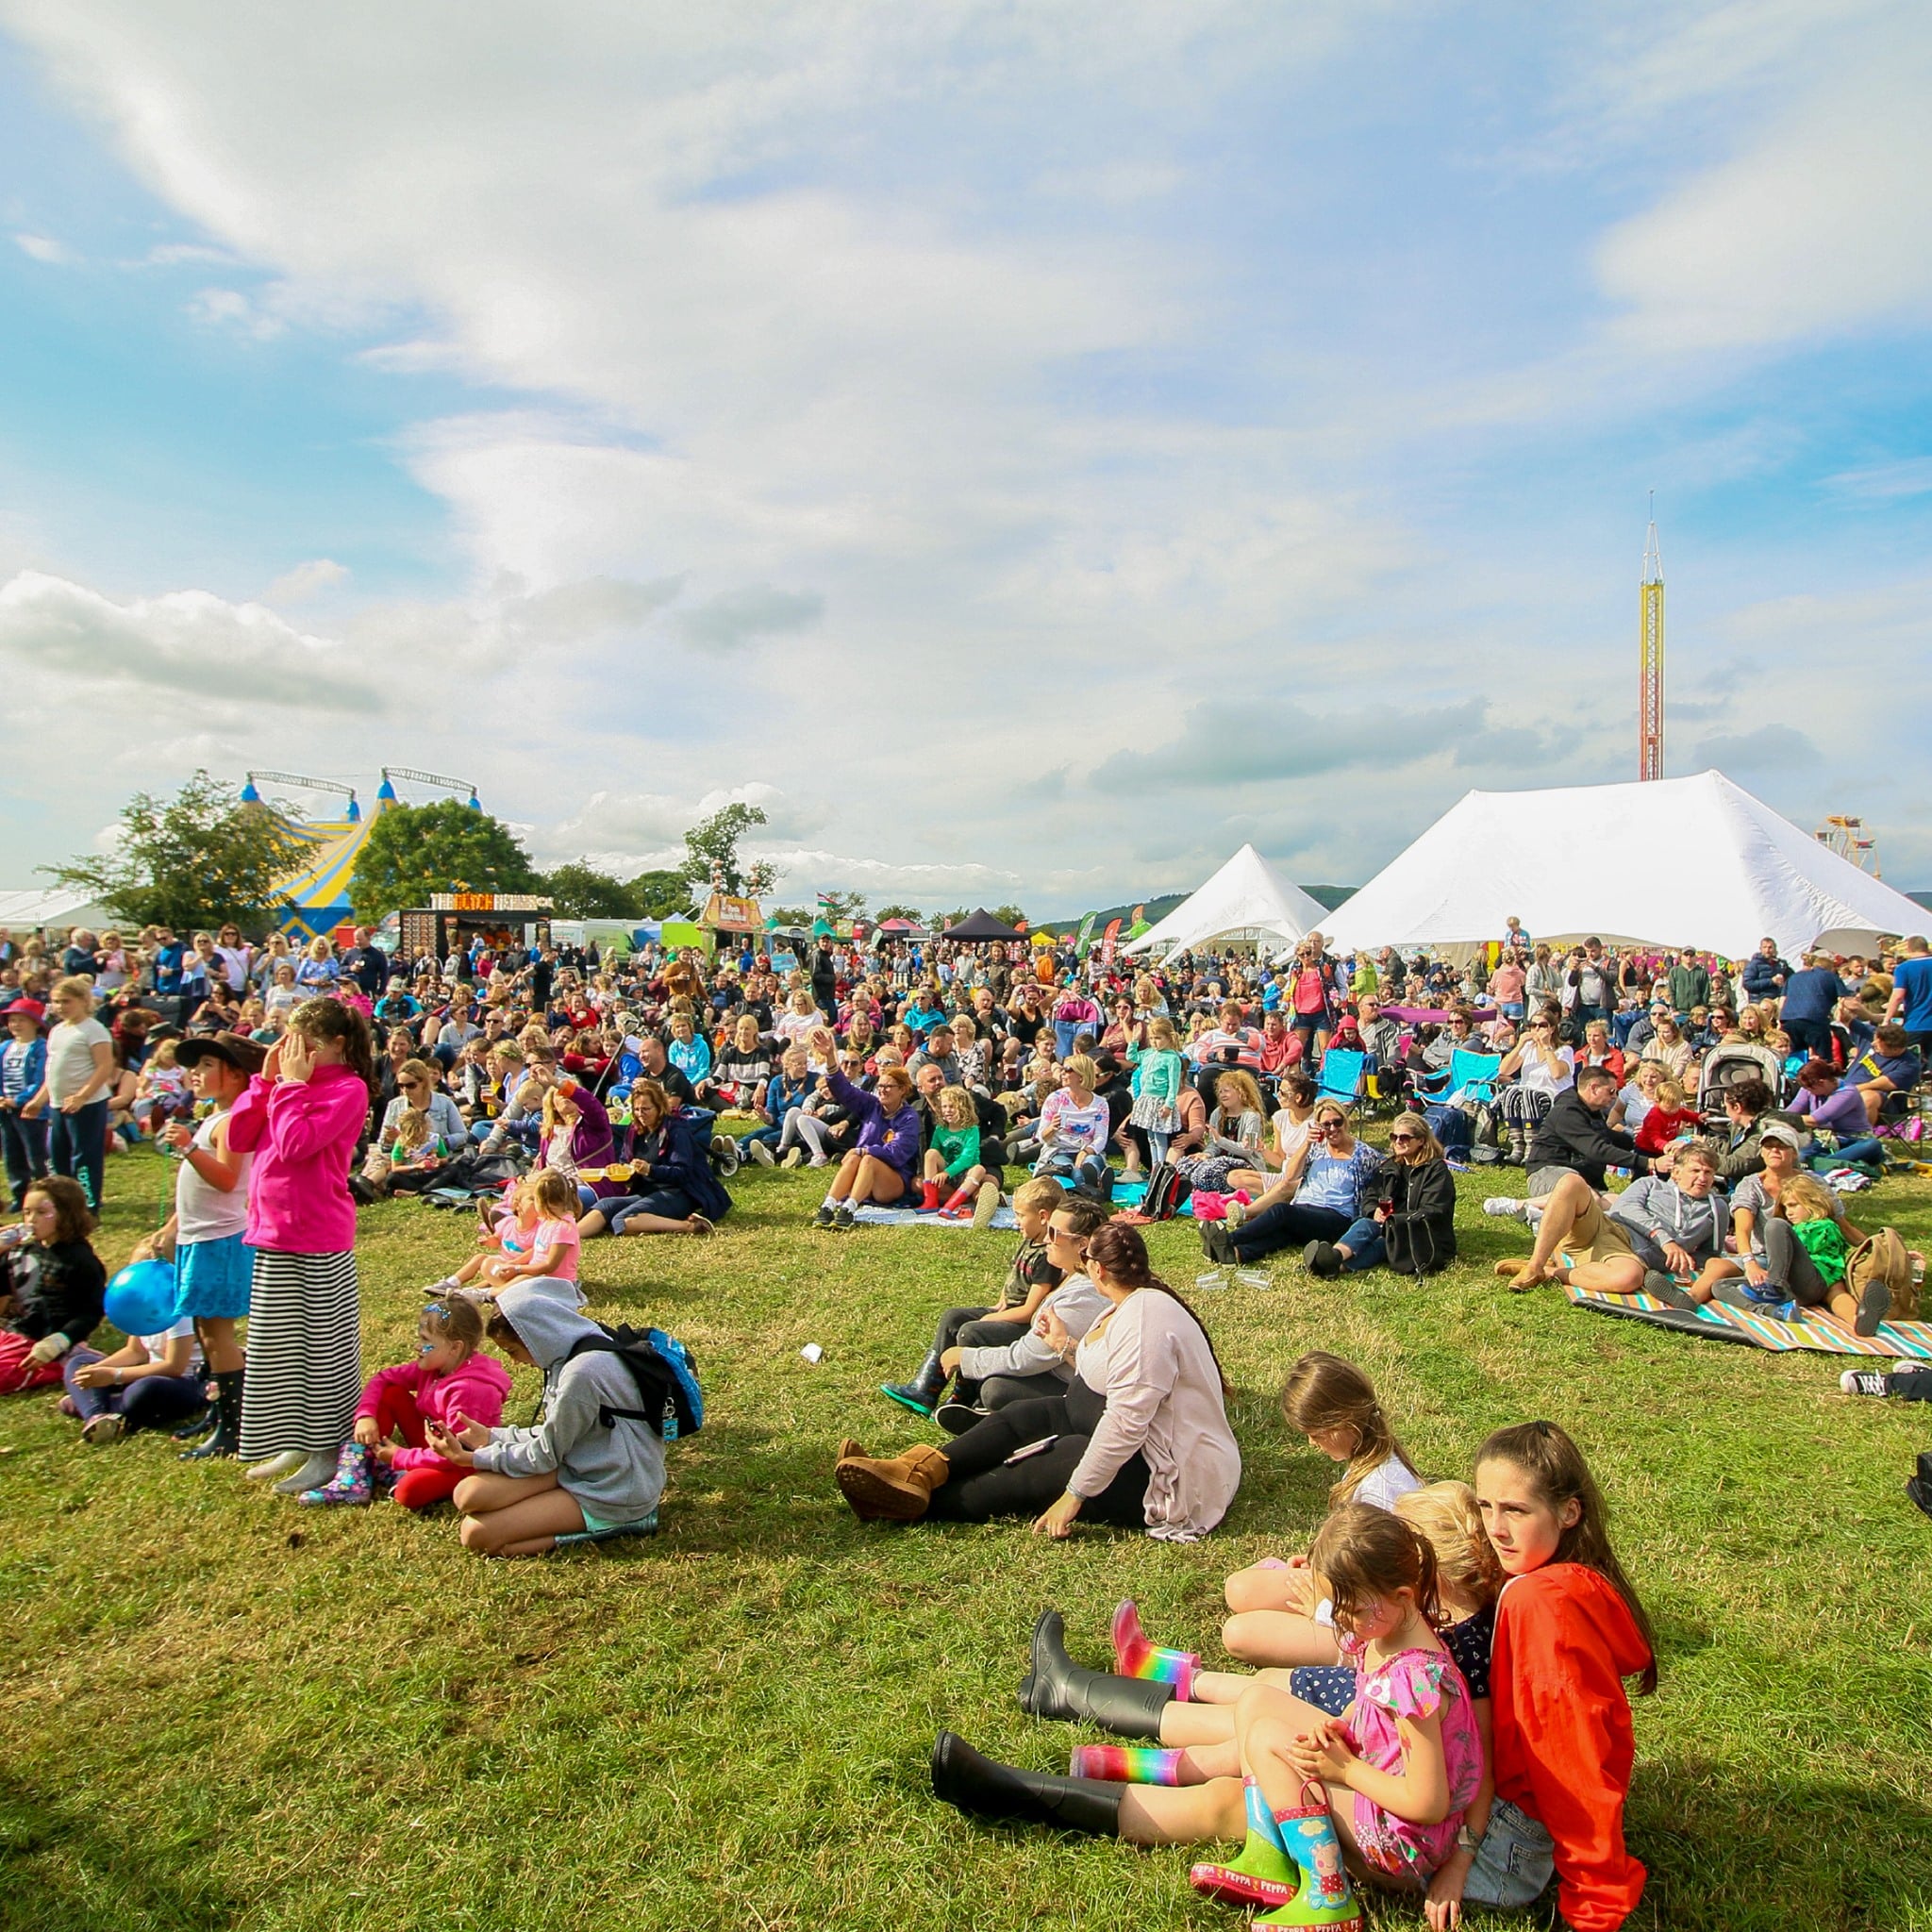 Yorkshire Dales Food and Drink Festival crowds